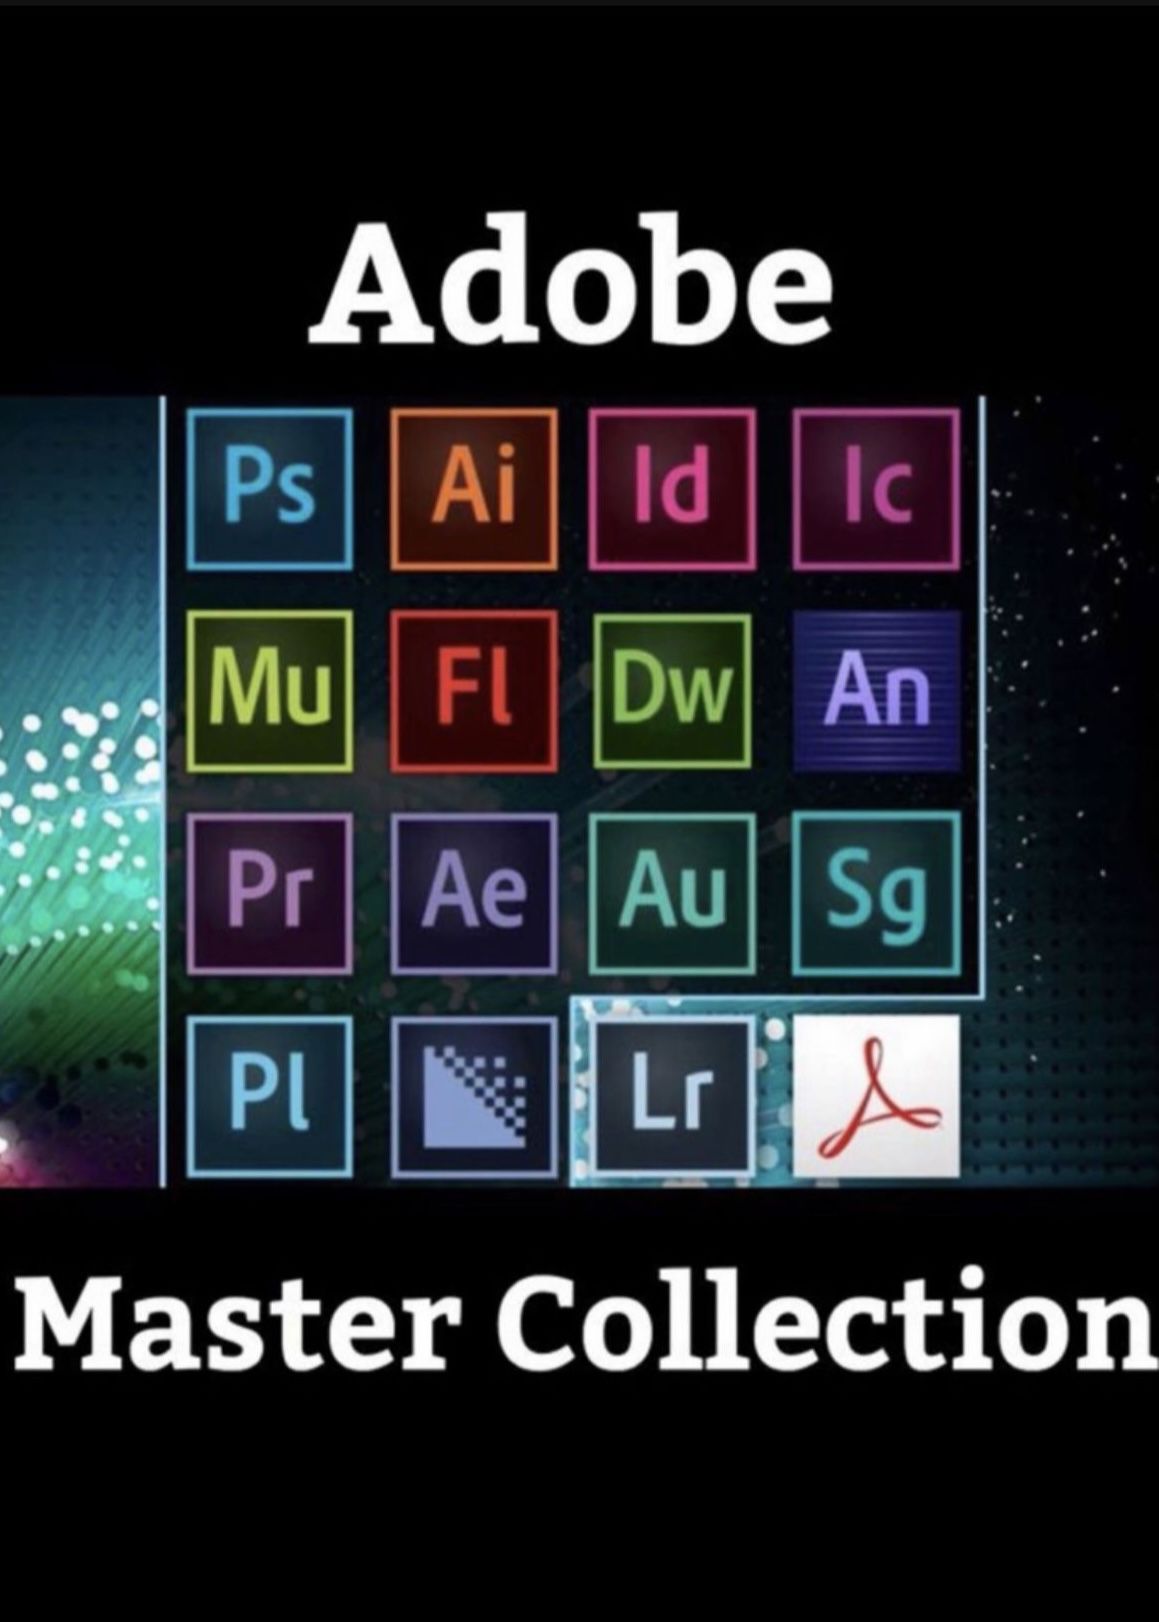 Adobe Suite Master Collection - All Apps